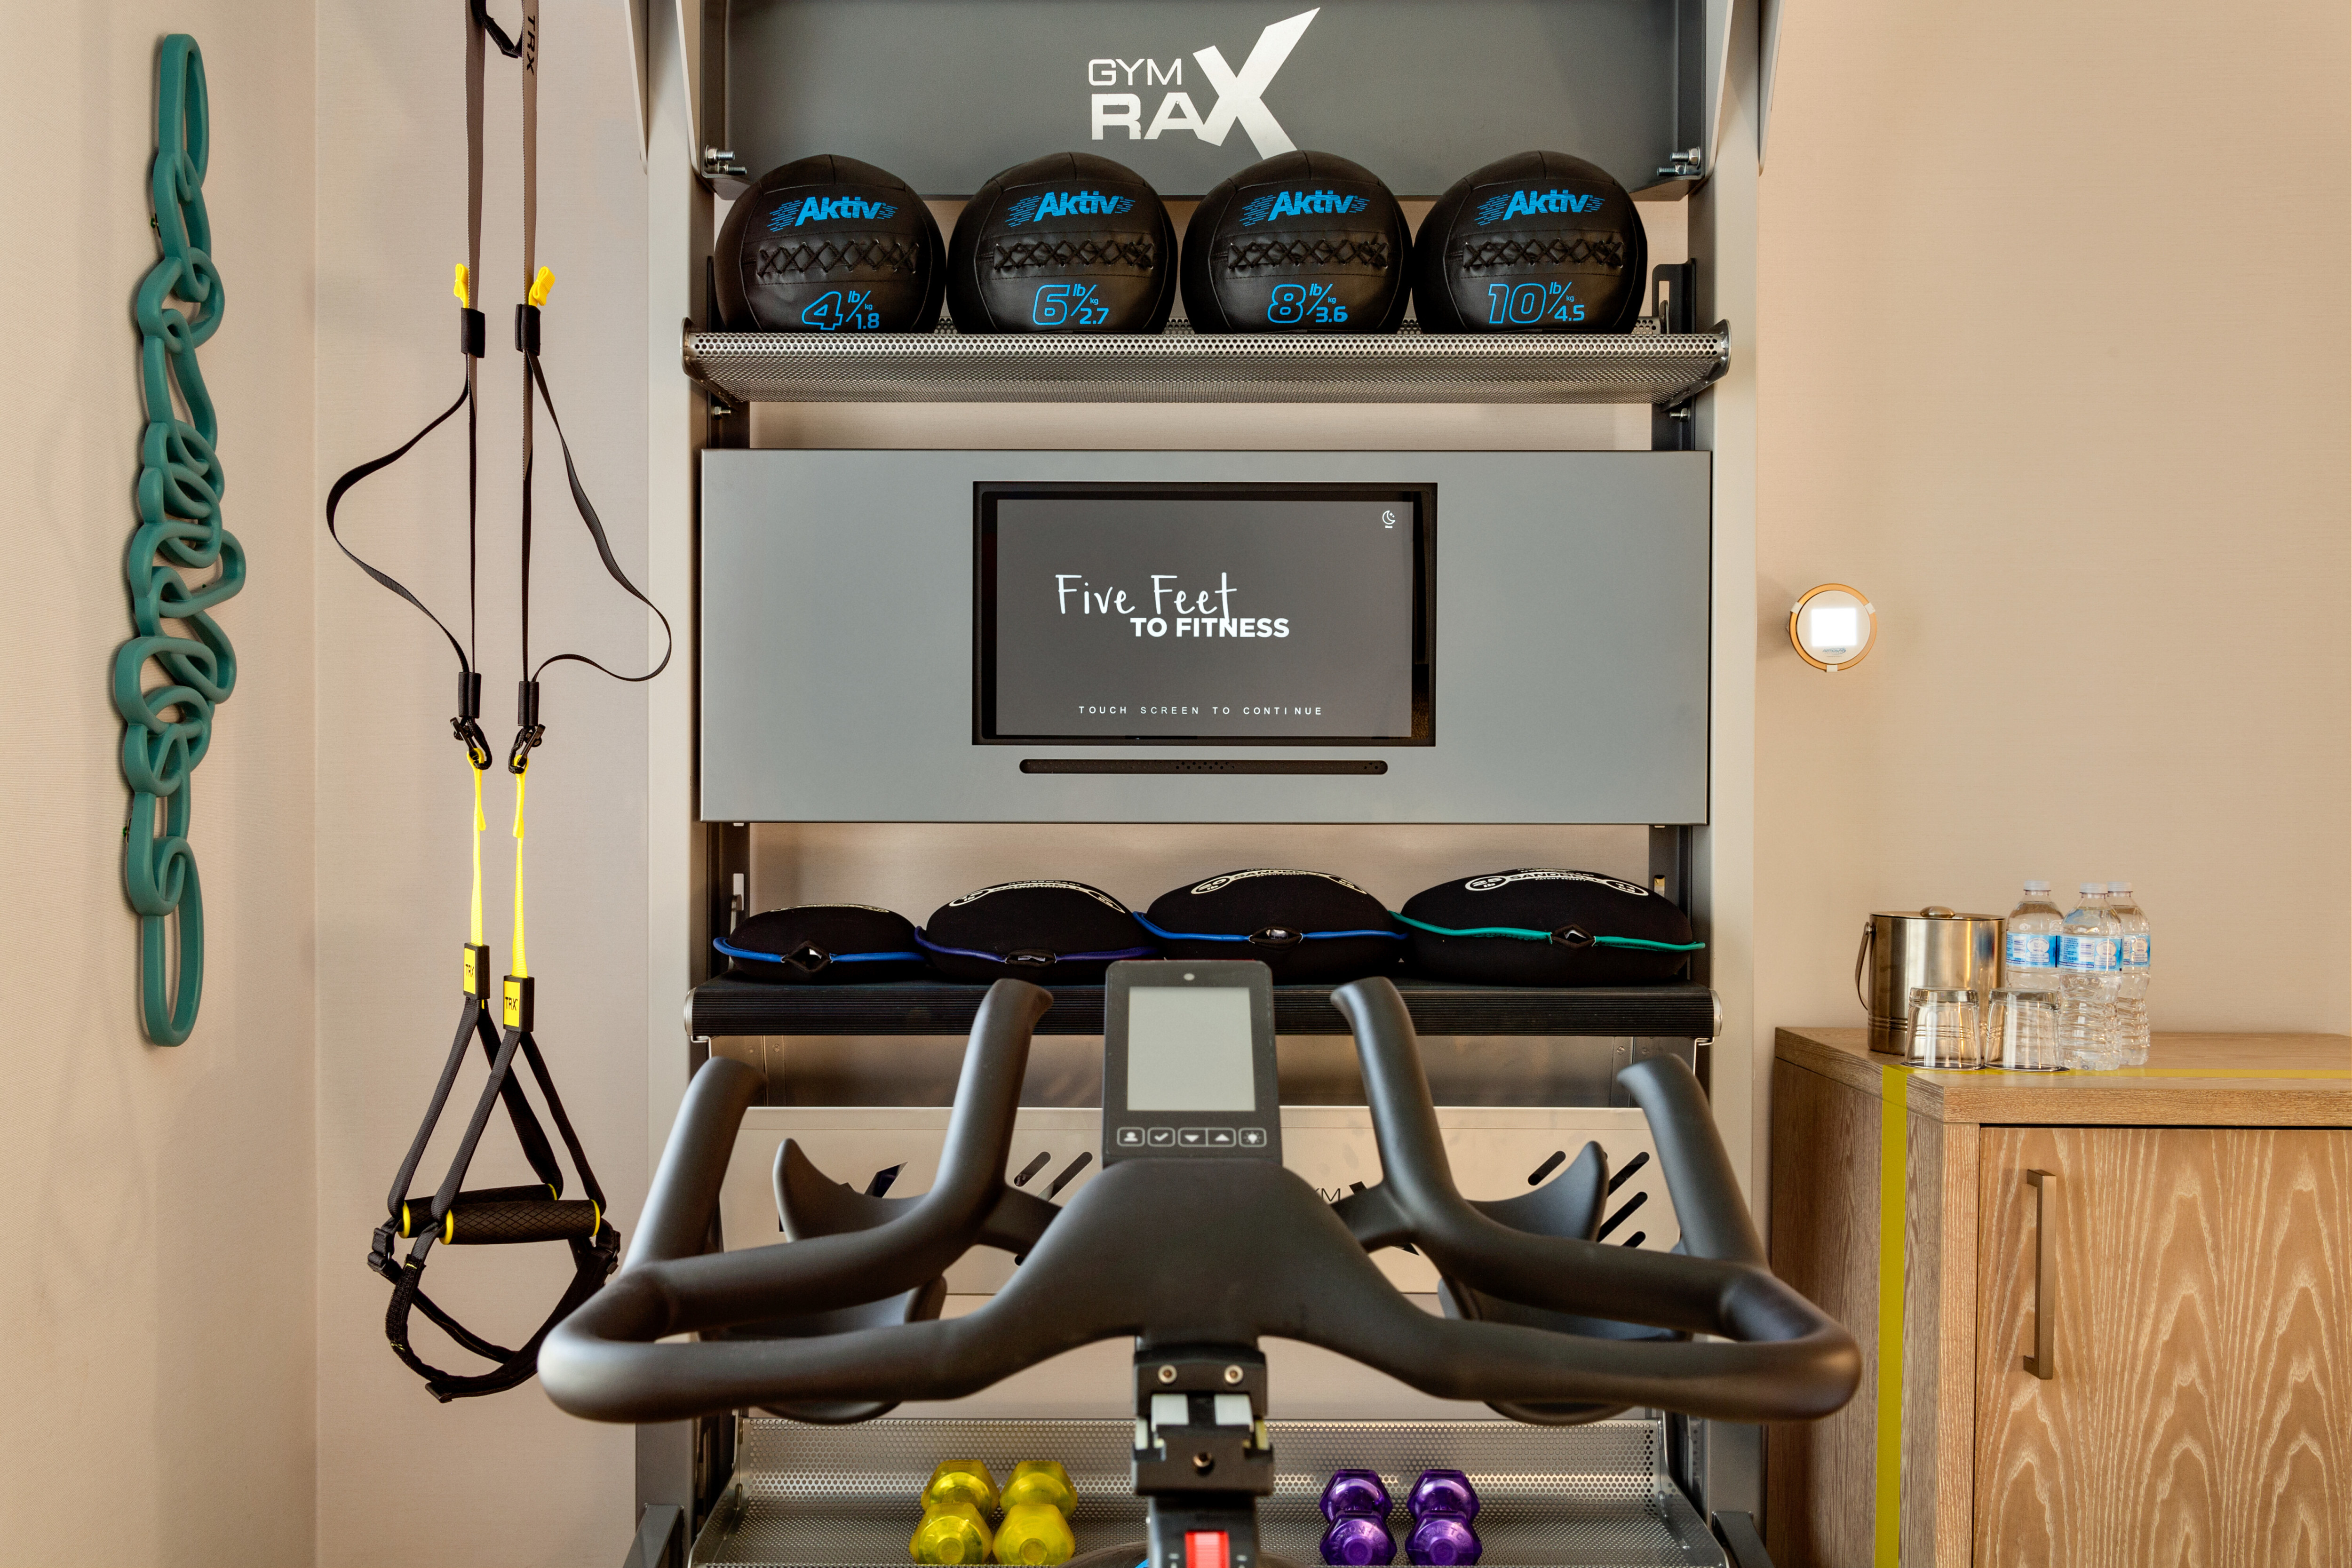 Fitness Area in Hotel Guest Room